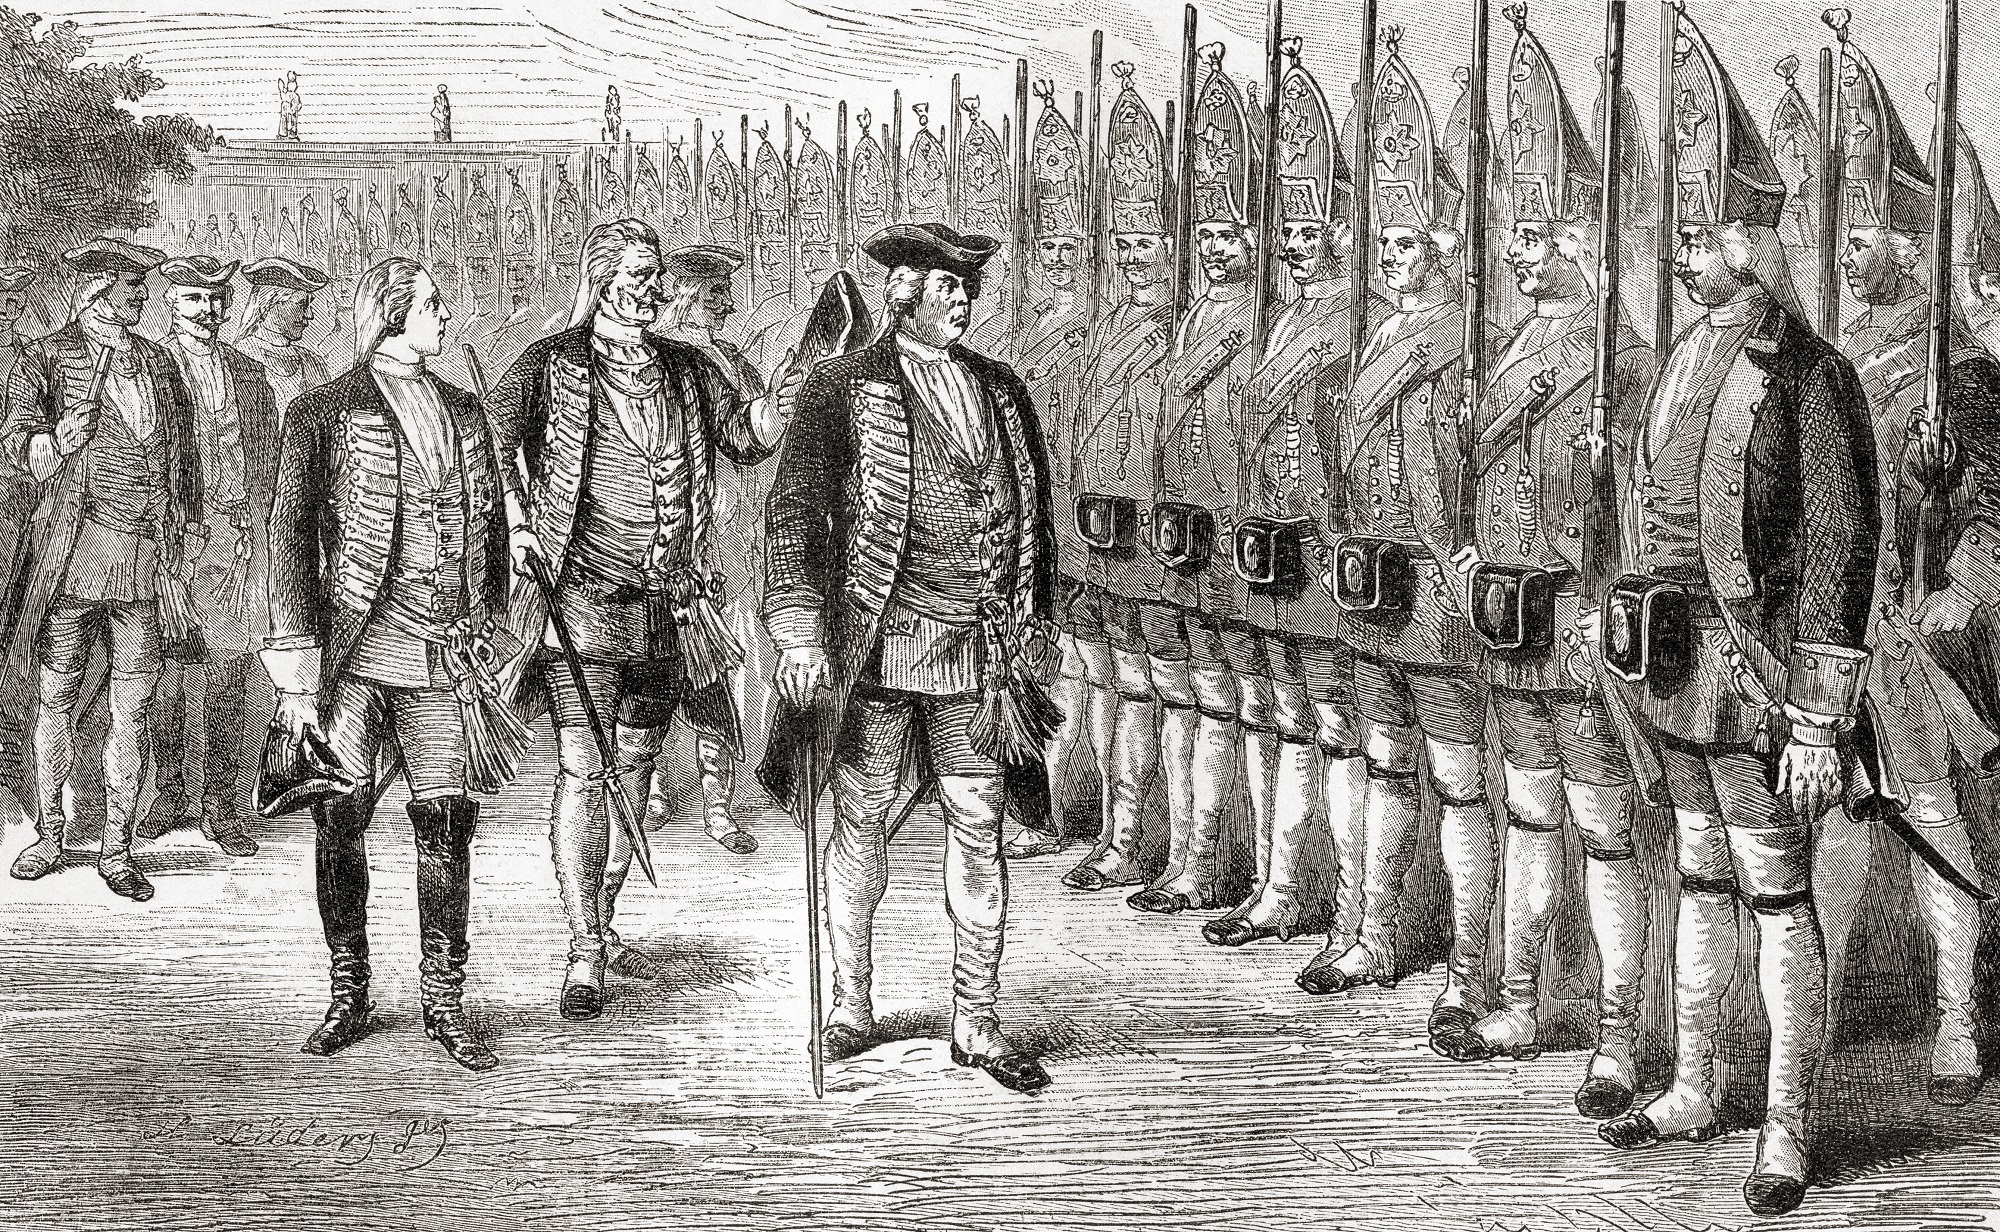 Frederick William I inspecting his giant guards known as The Potsdam Giants, a Prussian infantry regiment No 6, composed of taller-than-average soldiers.  Frederick William I of Prussia, 1688 - 1740, aka Soldier King.  King in Prussia and Elector of Brandenburg.  From Ward and Lock's Illustrated History of the World, published c.1882.(Photo by: Universal History Archive/Universal Images Group via Getty Images)